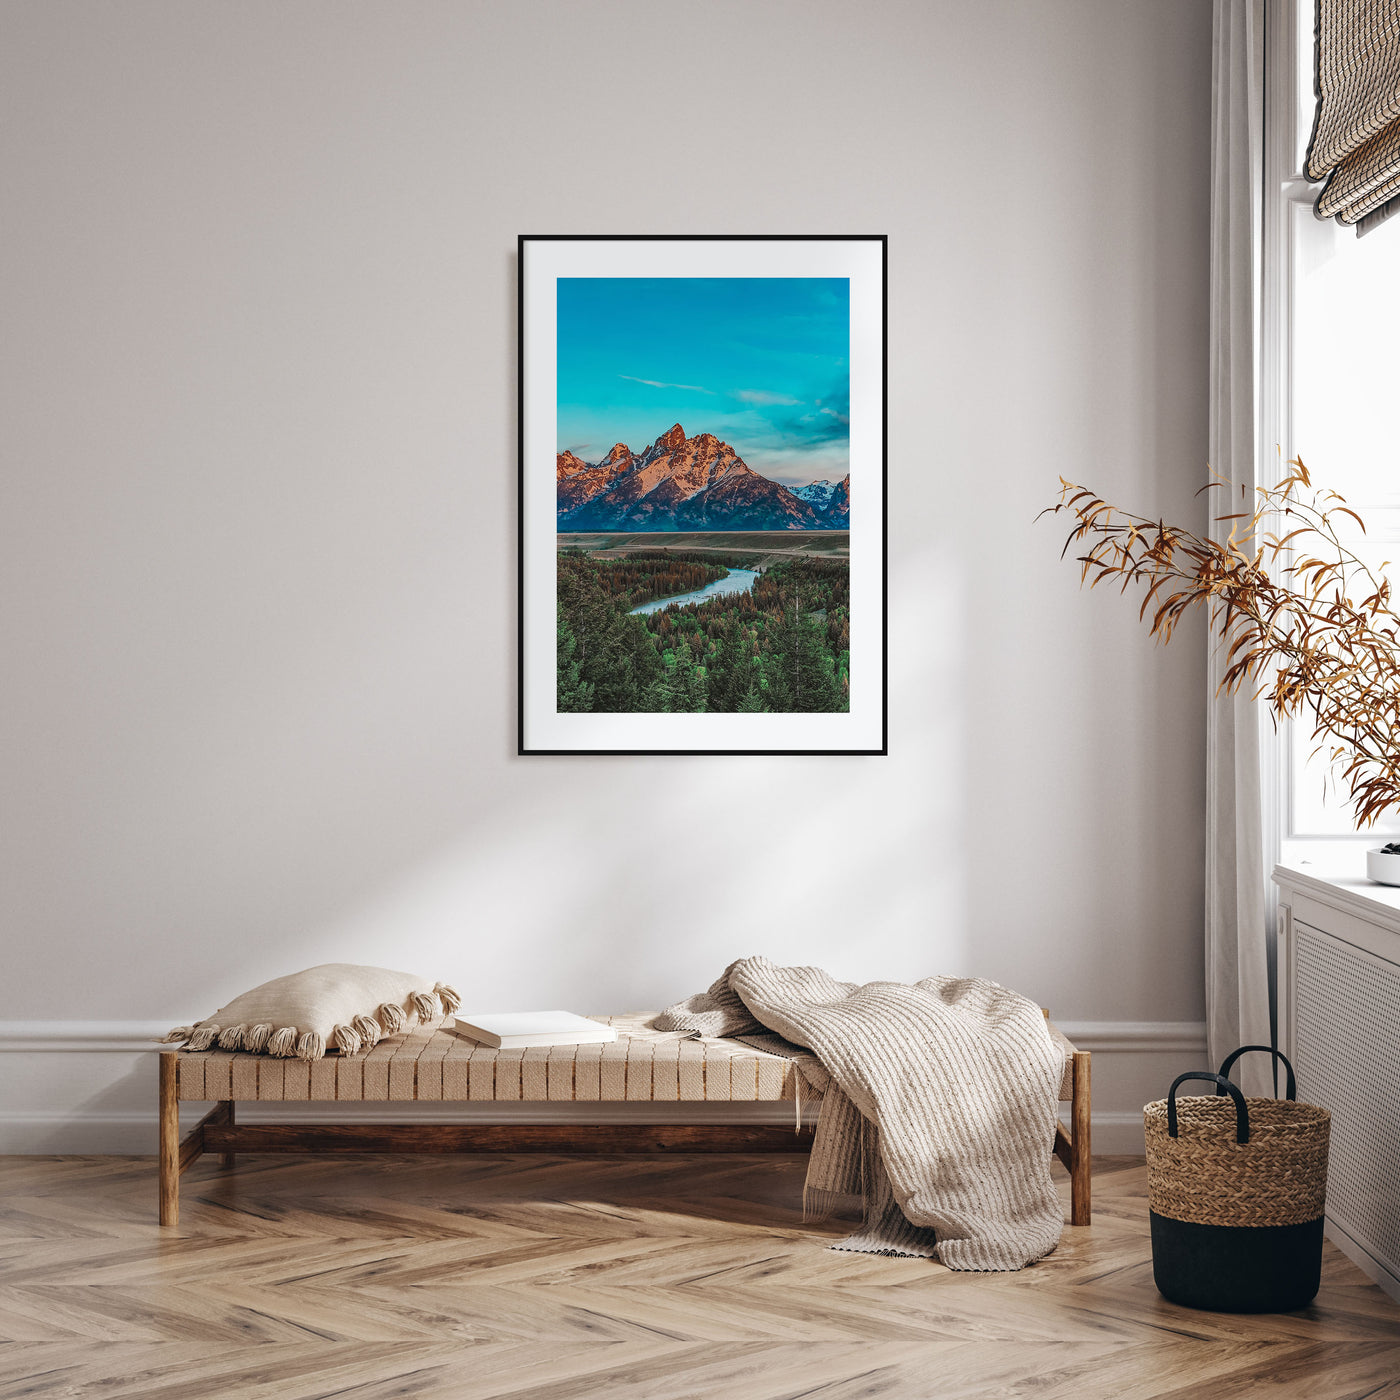 Wyoming Photo Color Poster